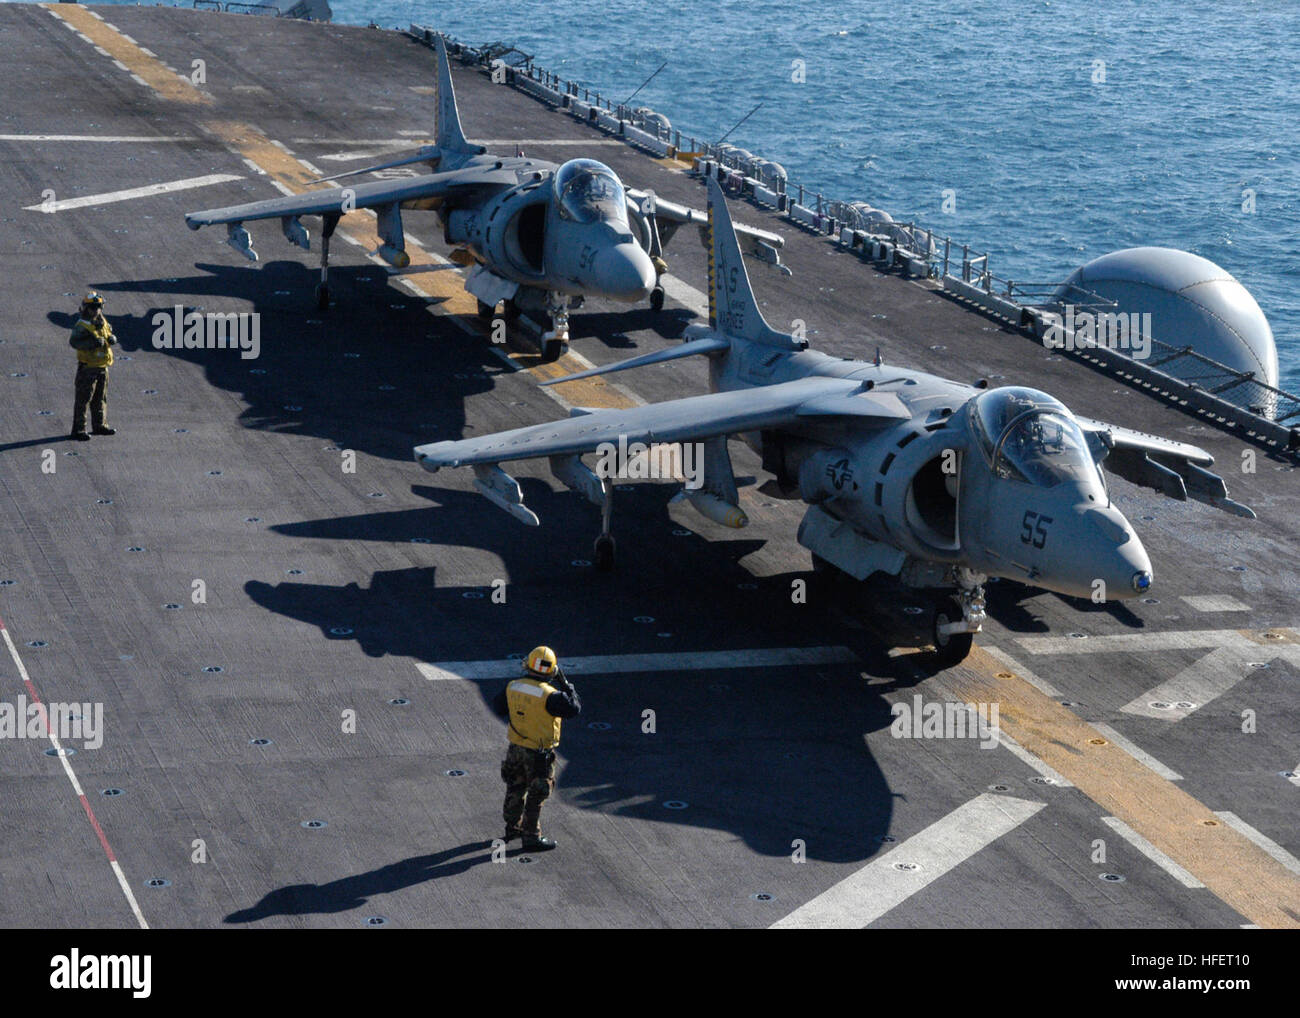 031215-N-8053S-002 Gulf of Mexico (Dec. 15, 2003) – Two AV-8B Harriers prepare to launch from the flight deck aboard the amphibious assault ship USS Wasp (LHD 1).  The Wasp Expeditionary Strike Group's (ESG) is conducting exercises in the Gulf of Mexico in preparation for the first-ever East Coast ESG deployment early next year. U.S. Navy photo by Photographer's Mate 3rd Class David K. Simmons. (RELEASED) US Navy 031215-N-8053S-002 Two AV-8B Harriers prepare to launch from the flight deck aboard the amphibious assault ship USS Wasp (LHD 1) Stock Photo